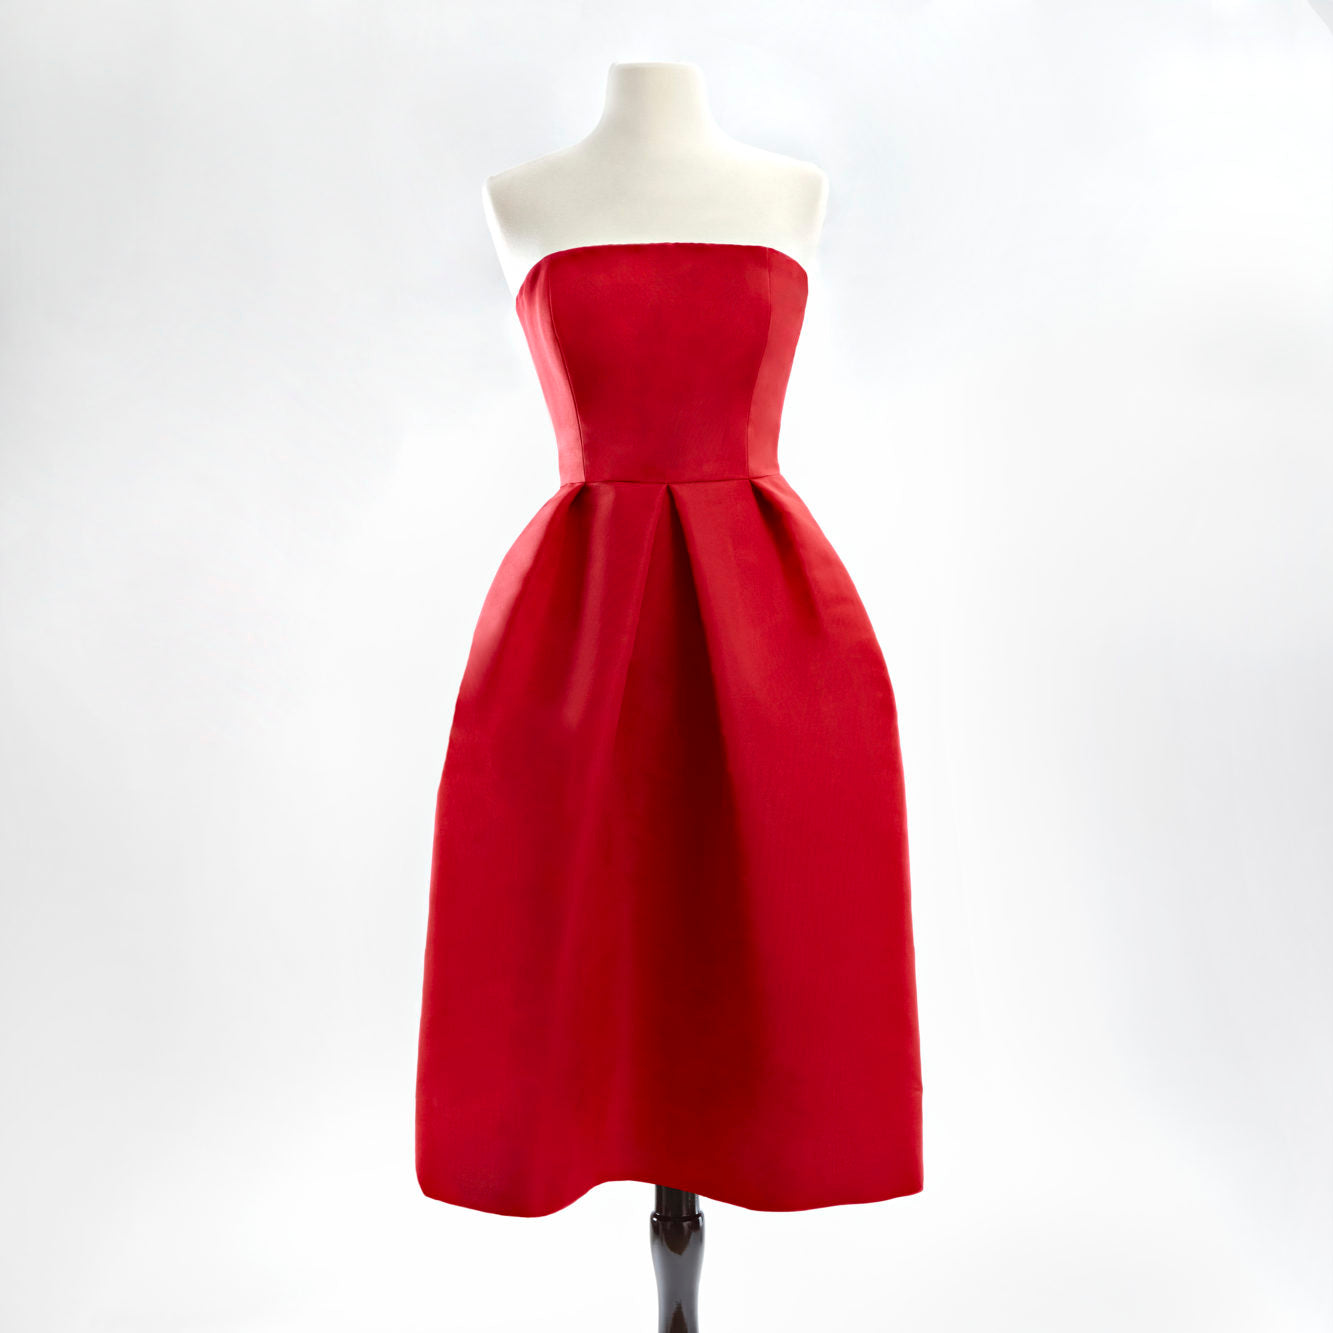 Red strapless silk faille cocktail dress with a full skirt